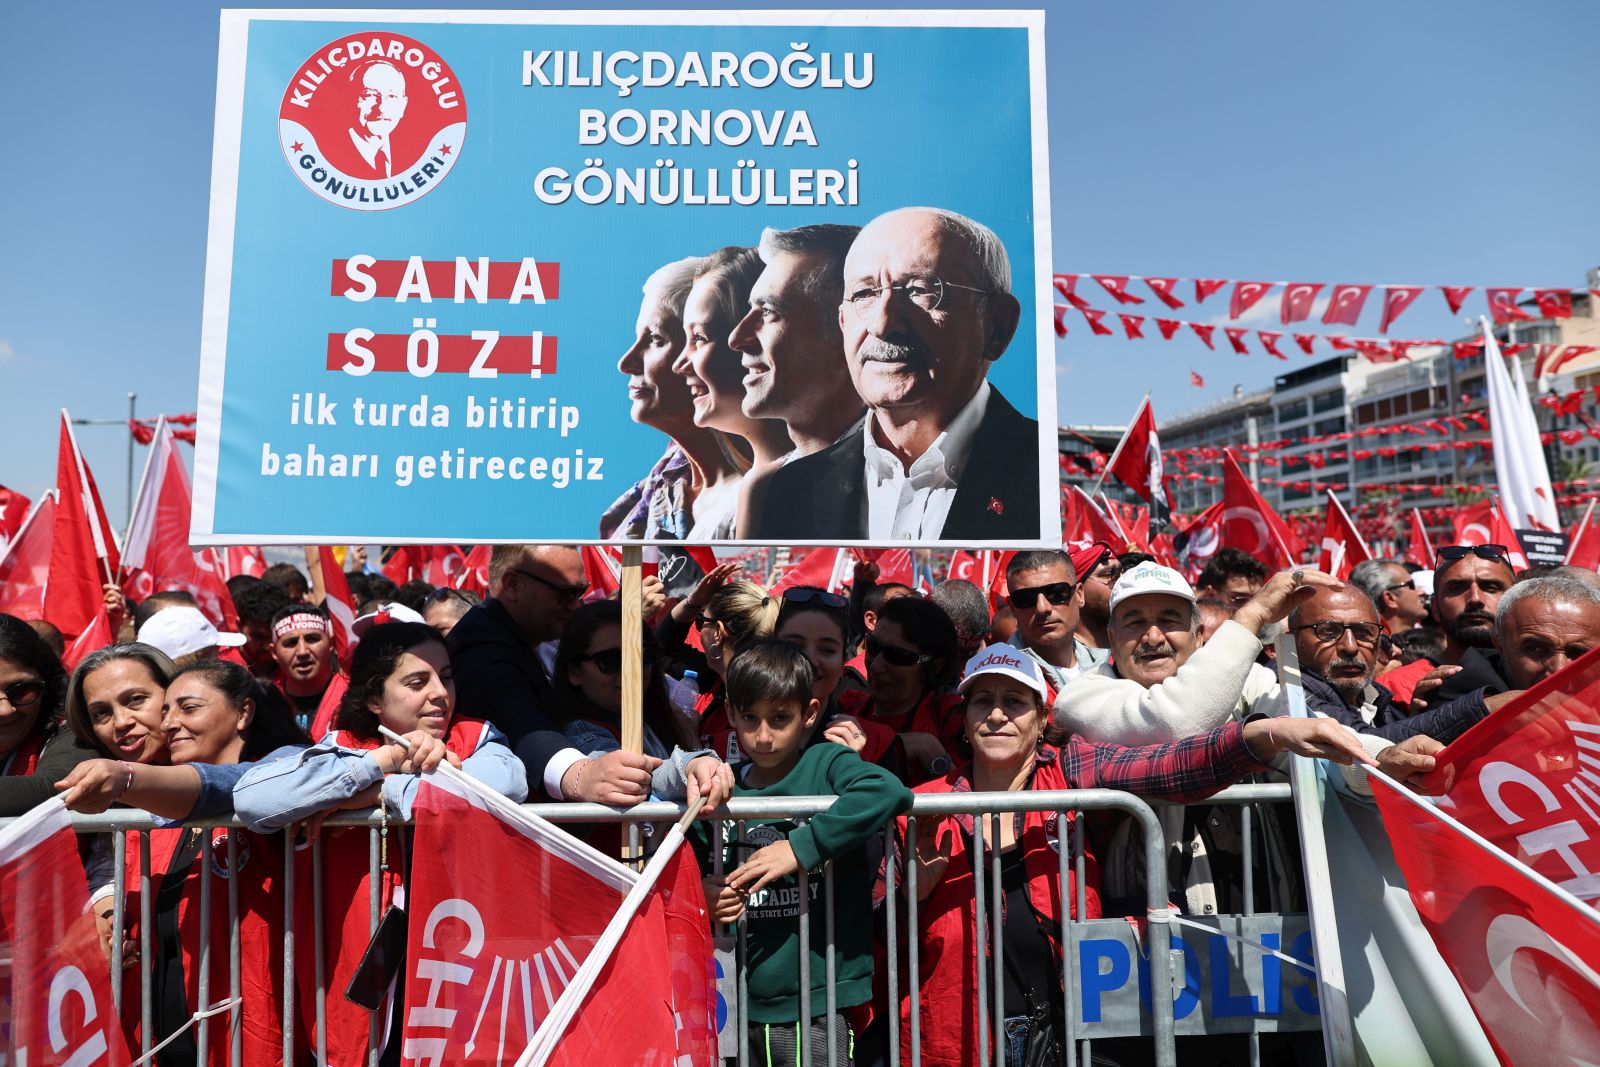 epa10599716 Supporters of Turkish presidential candidate Kemal Kilicdaroglu, leader of the opposition Republican People's Party (CHP), hold Turkish flags and shout slogans during his election campaign rally in lzmir, Turkey, 30 April 2023. General elections will be held in Turkey on 14 May 2023 with a two-round voting to elect the president of Turkey and the parliamentary elections will be held simultaneously to elect the members of the Grand National Assembly of Turkey.  EPA/TOLGA BOZOGLU